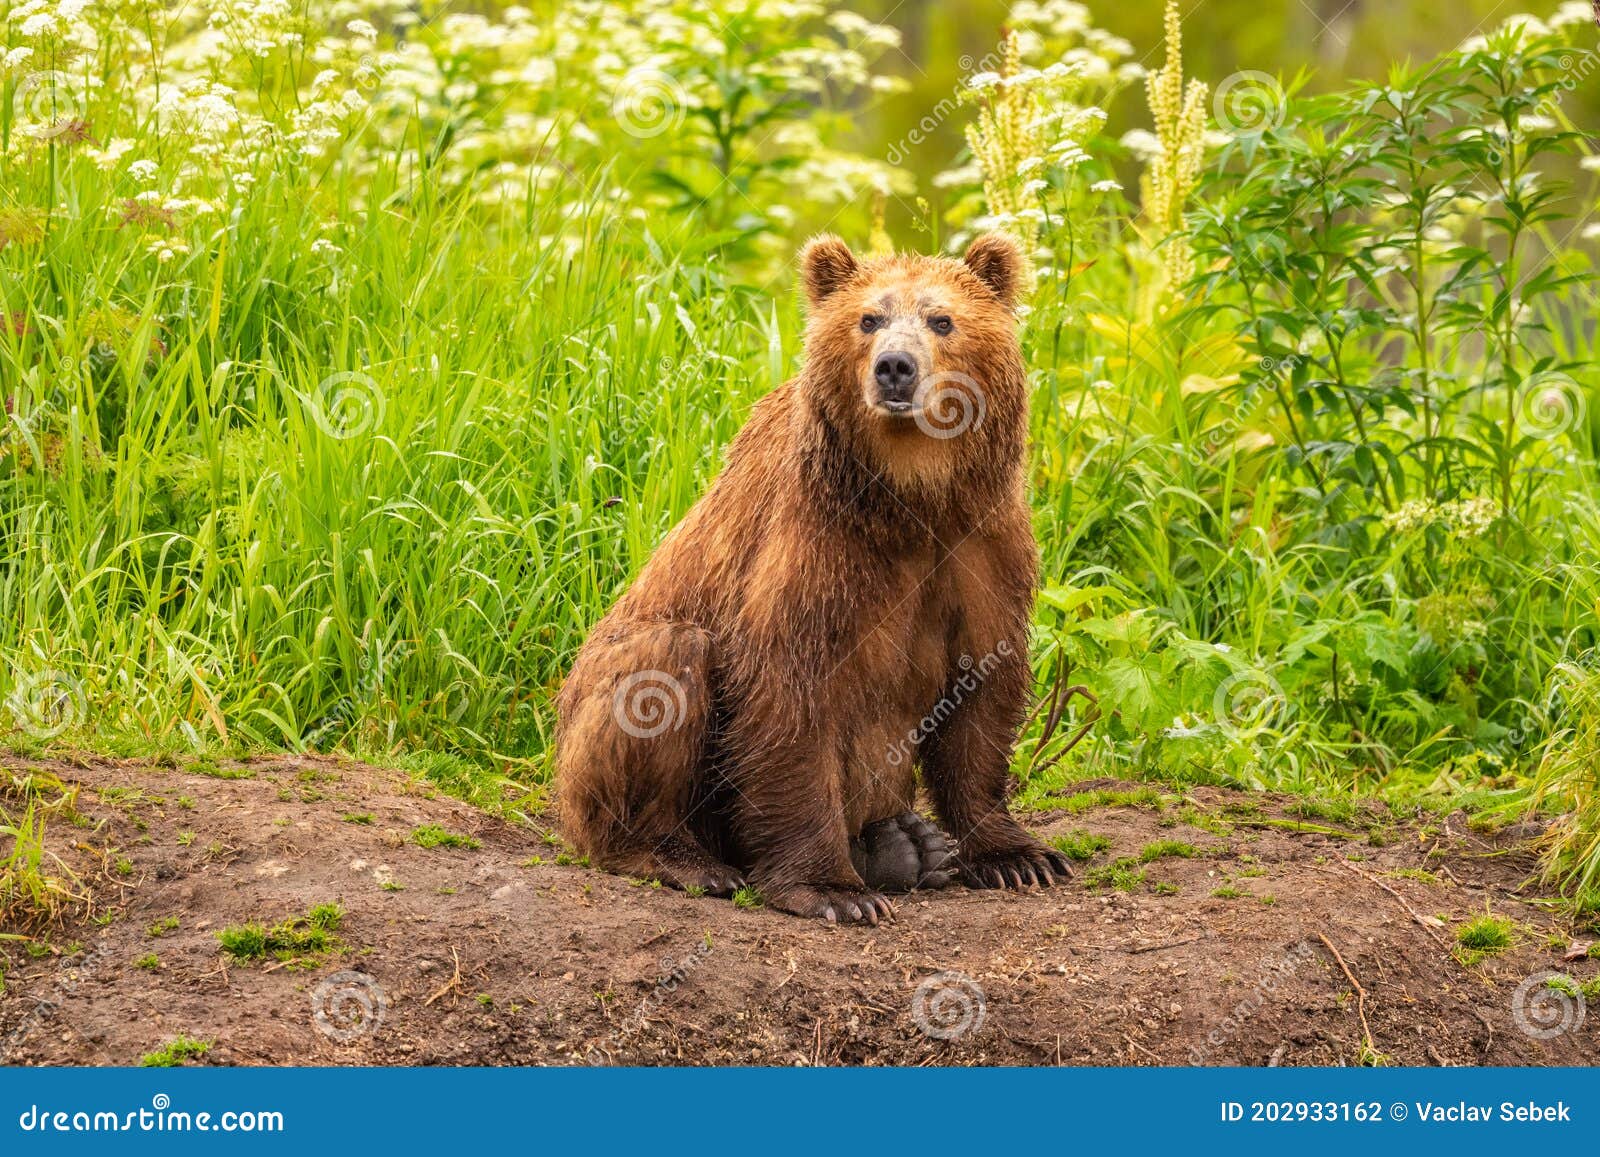 ruling the landscape, brown bears of kamchatka